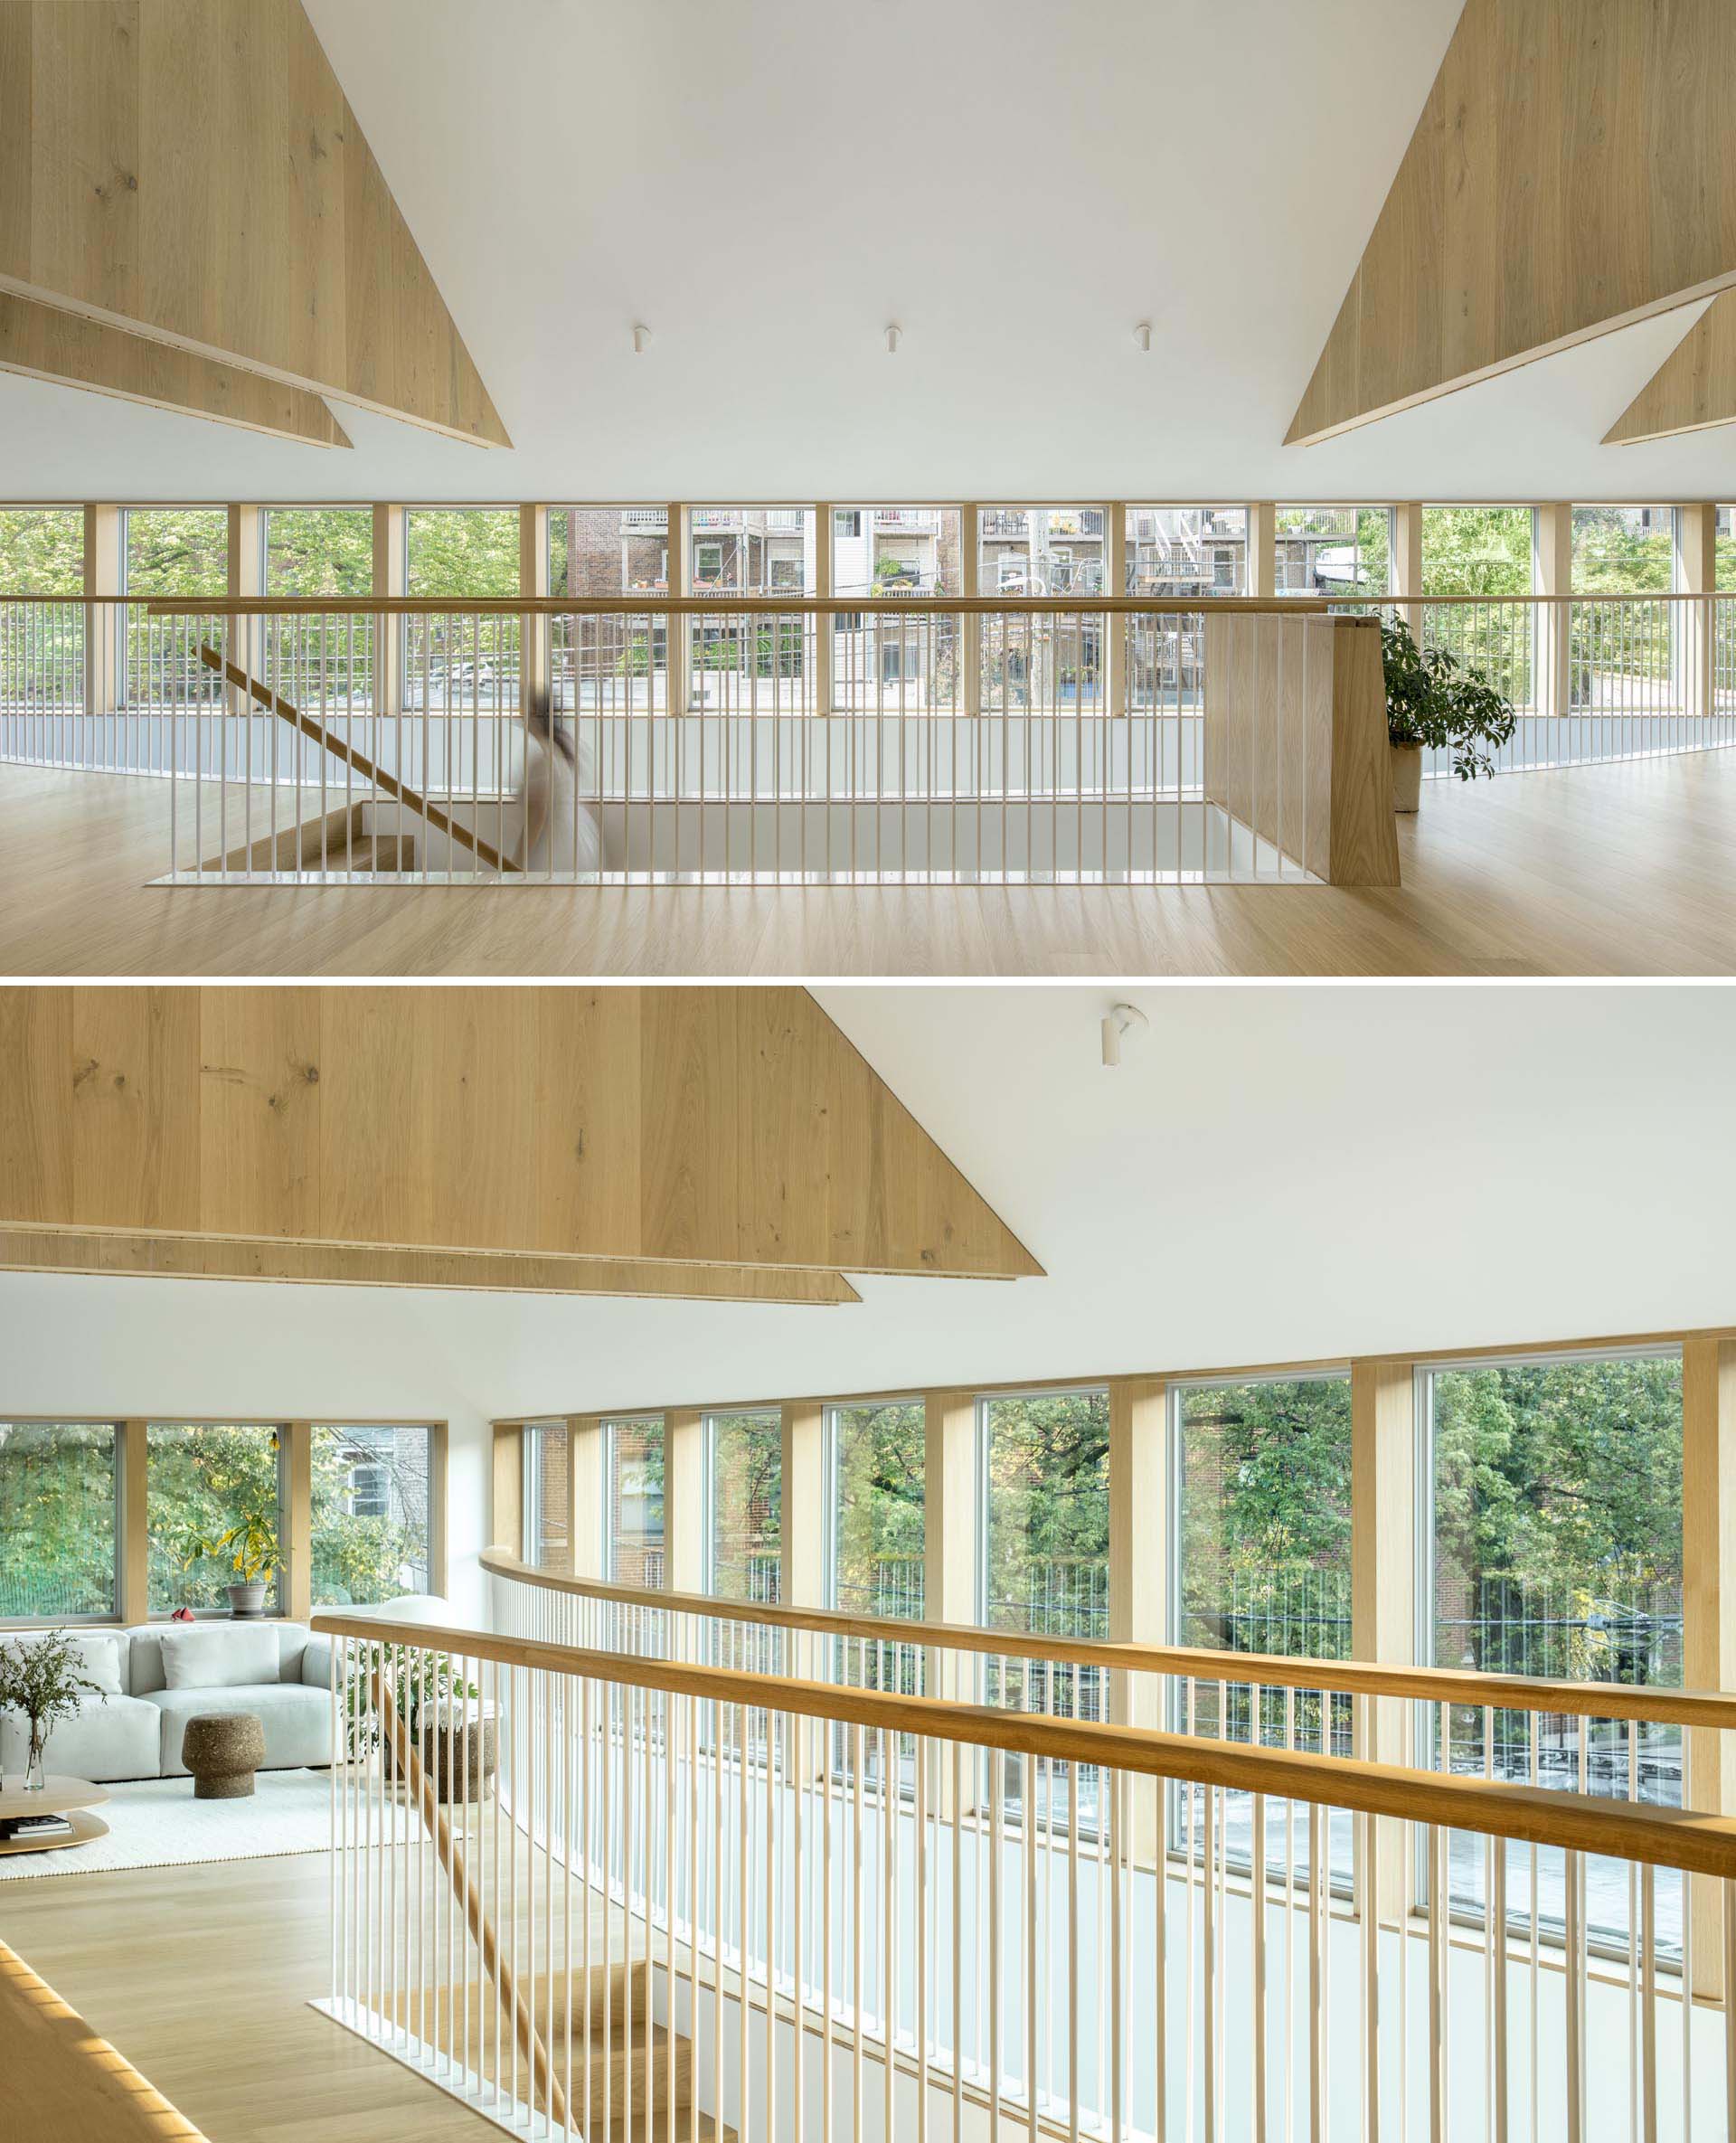 Wood stairs with a matching handrail and railing lead up to the social areas of this modern home.